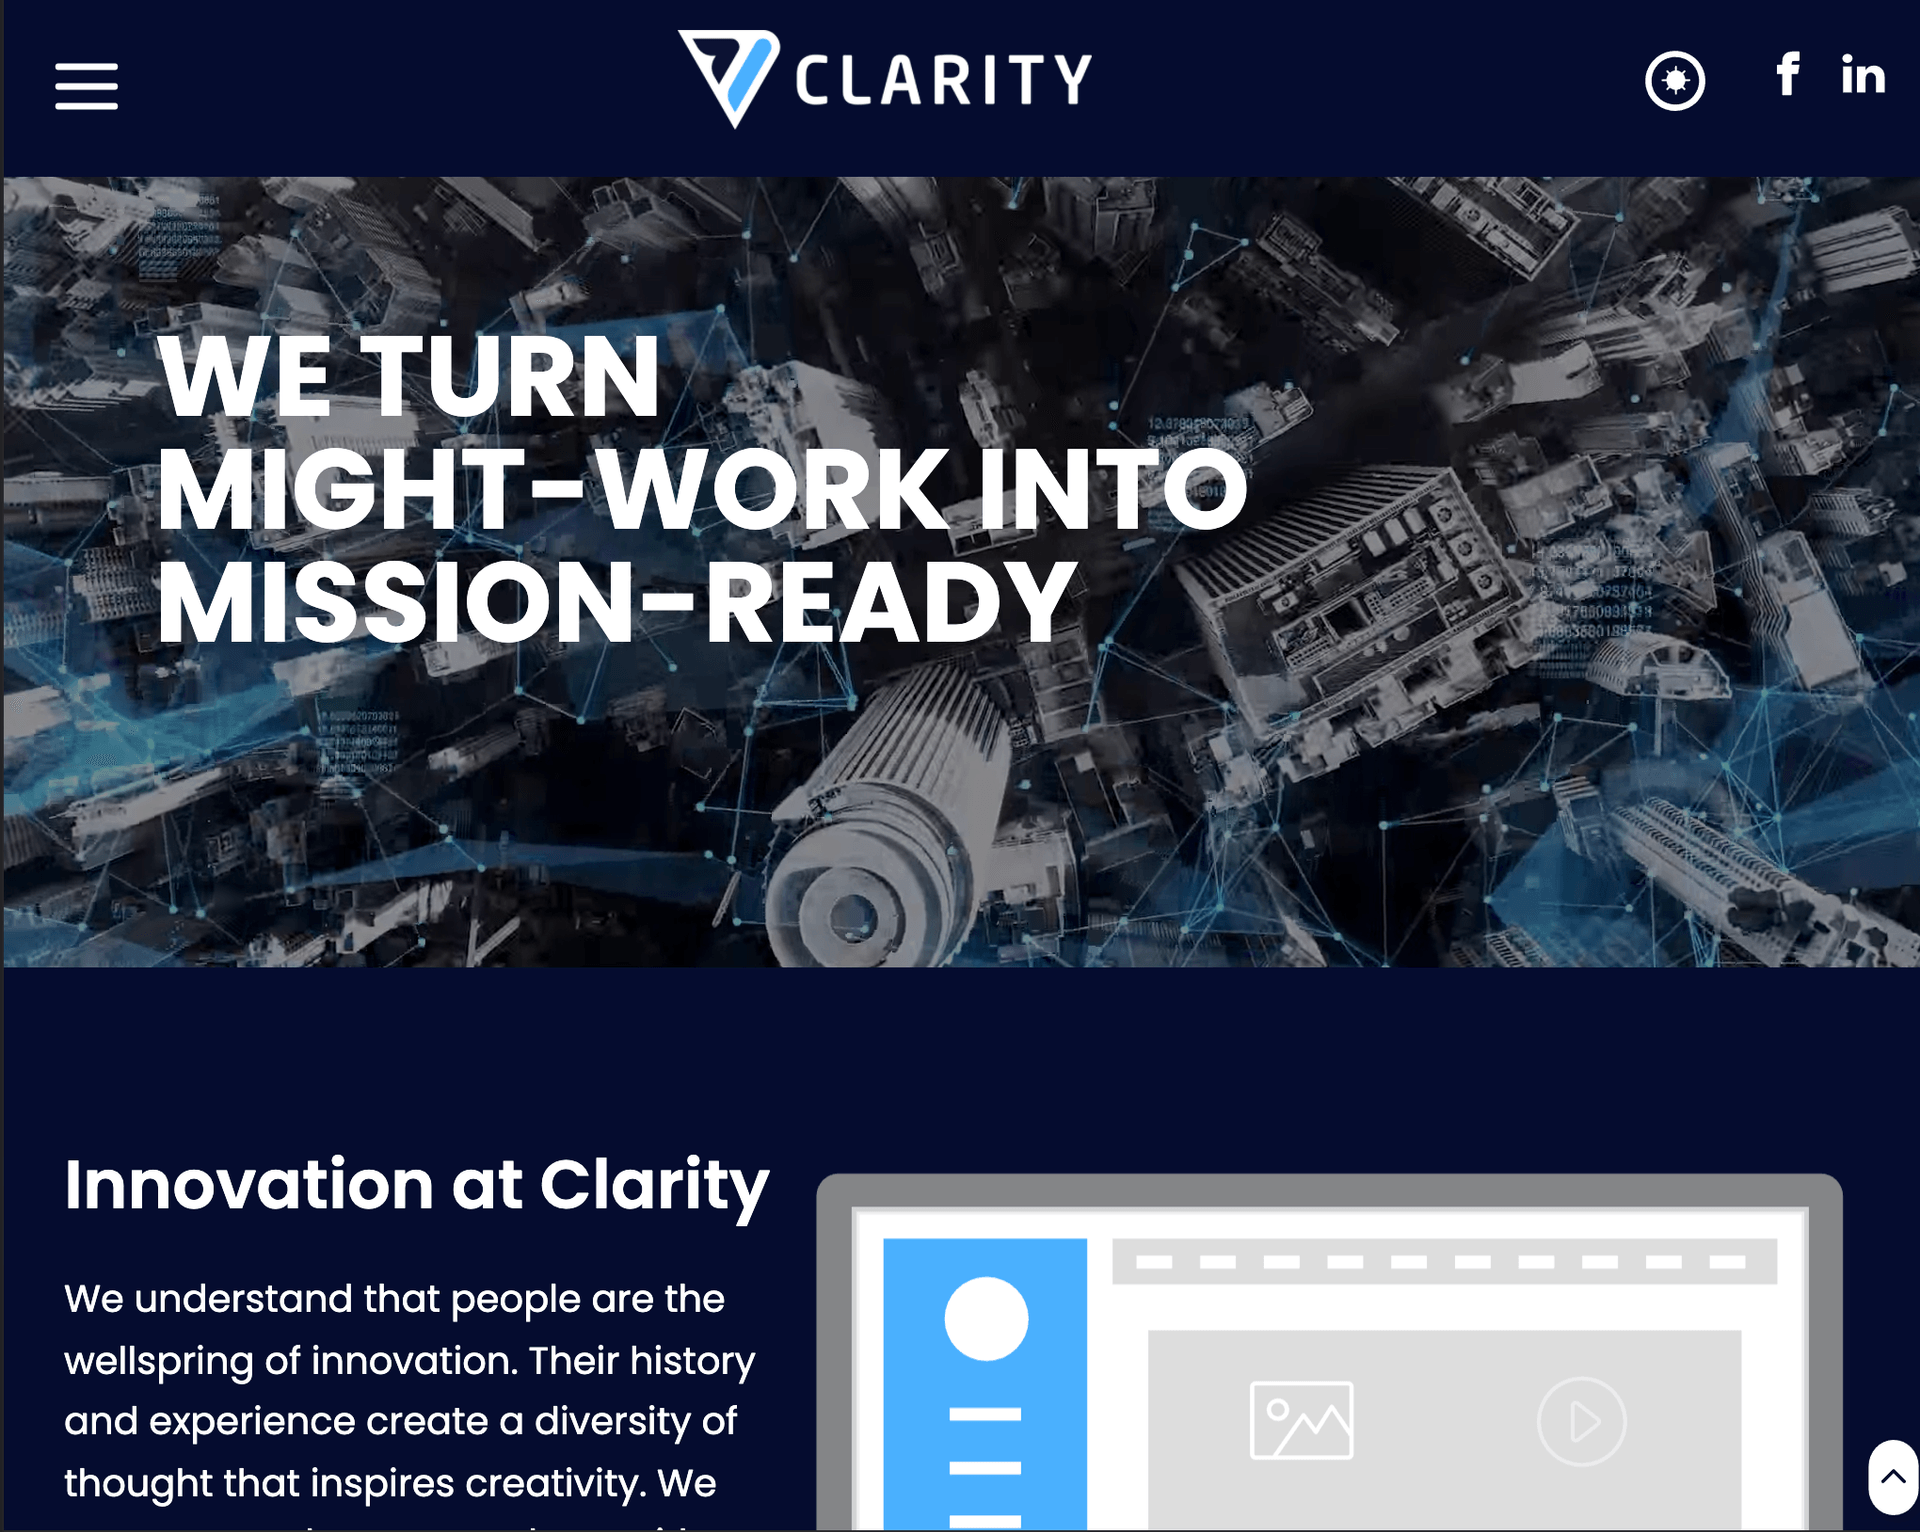 Clarity’s rebranded homepage - check out more on https://clarityinnovates.com